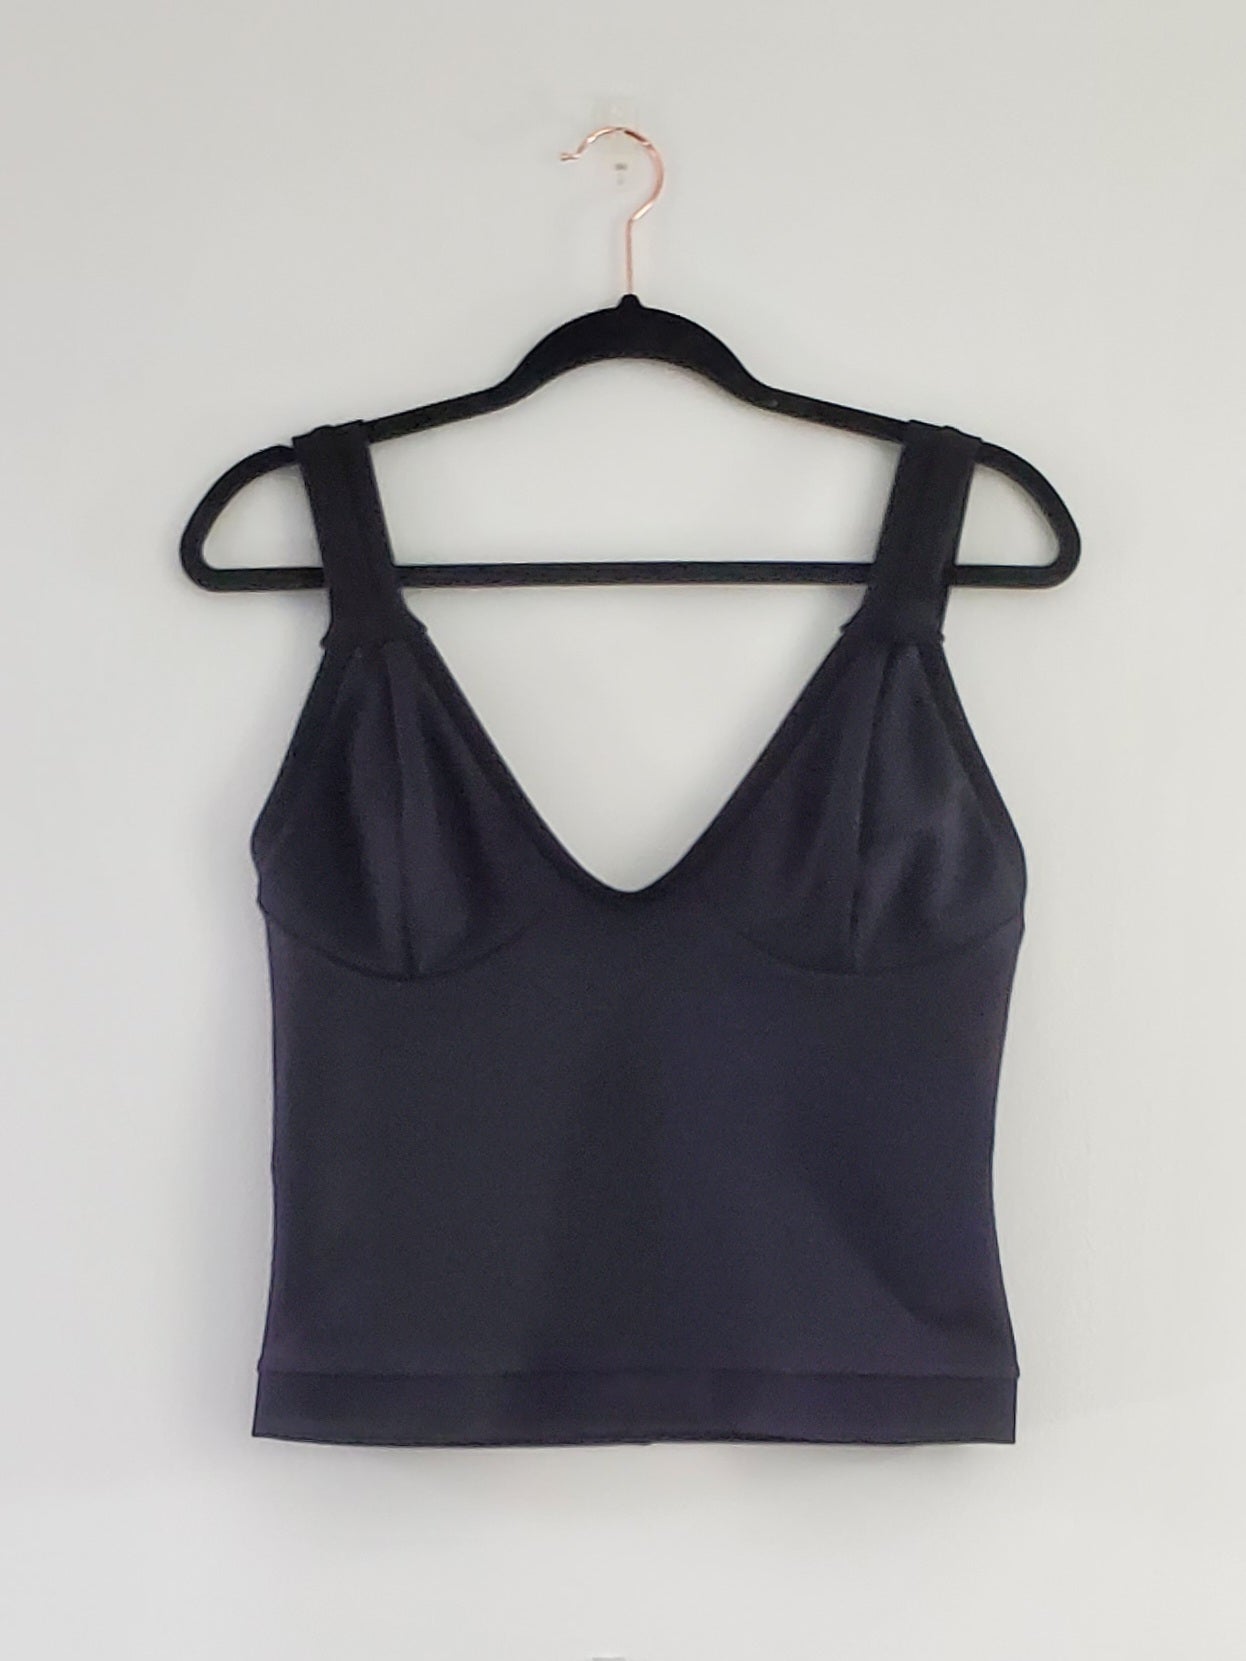 CM Black Ponte Tank with Seamed Bust - 1of1